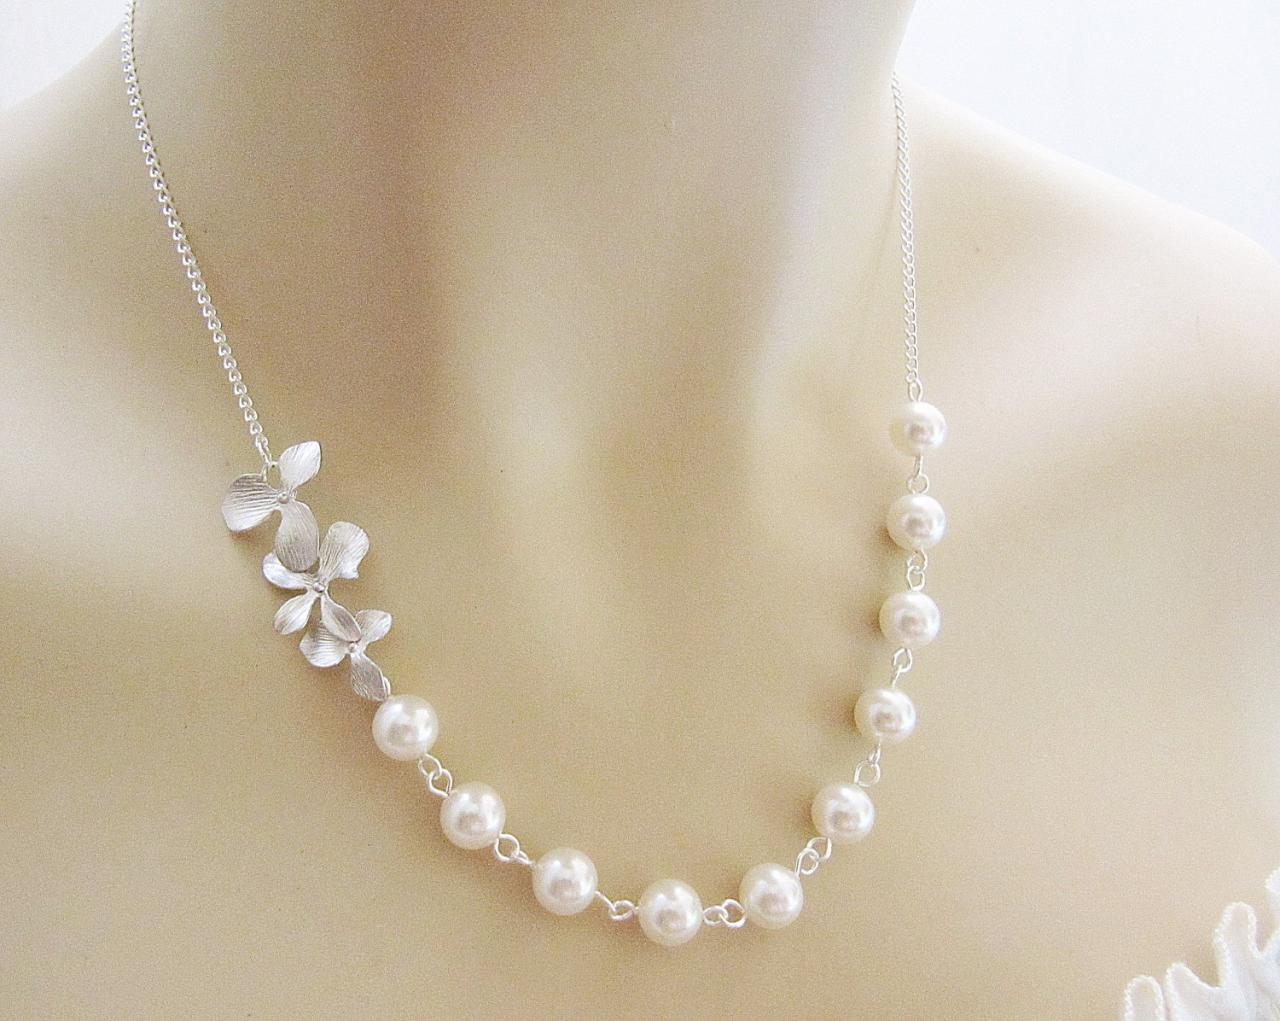 Wedding Jewelry Bridal Necklace Bridesmaid Necklace Matte Rodium Finish Orchid Trio Flower Charm And Crystal White Swarovski Pearls